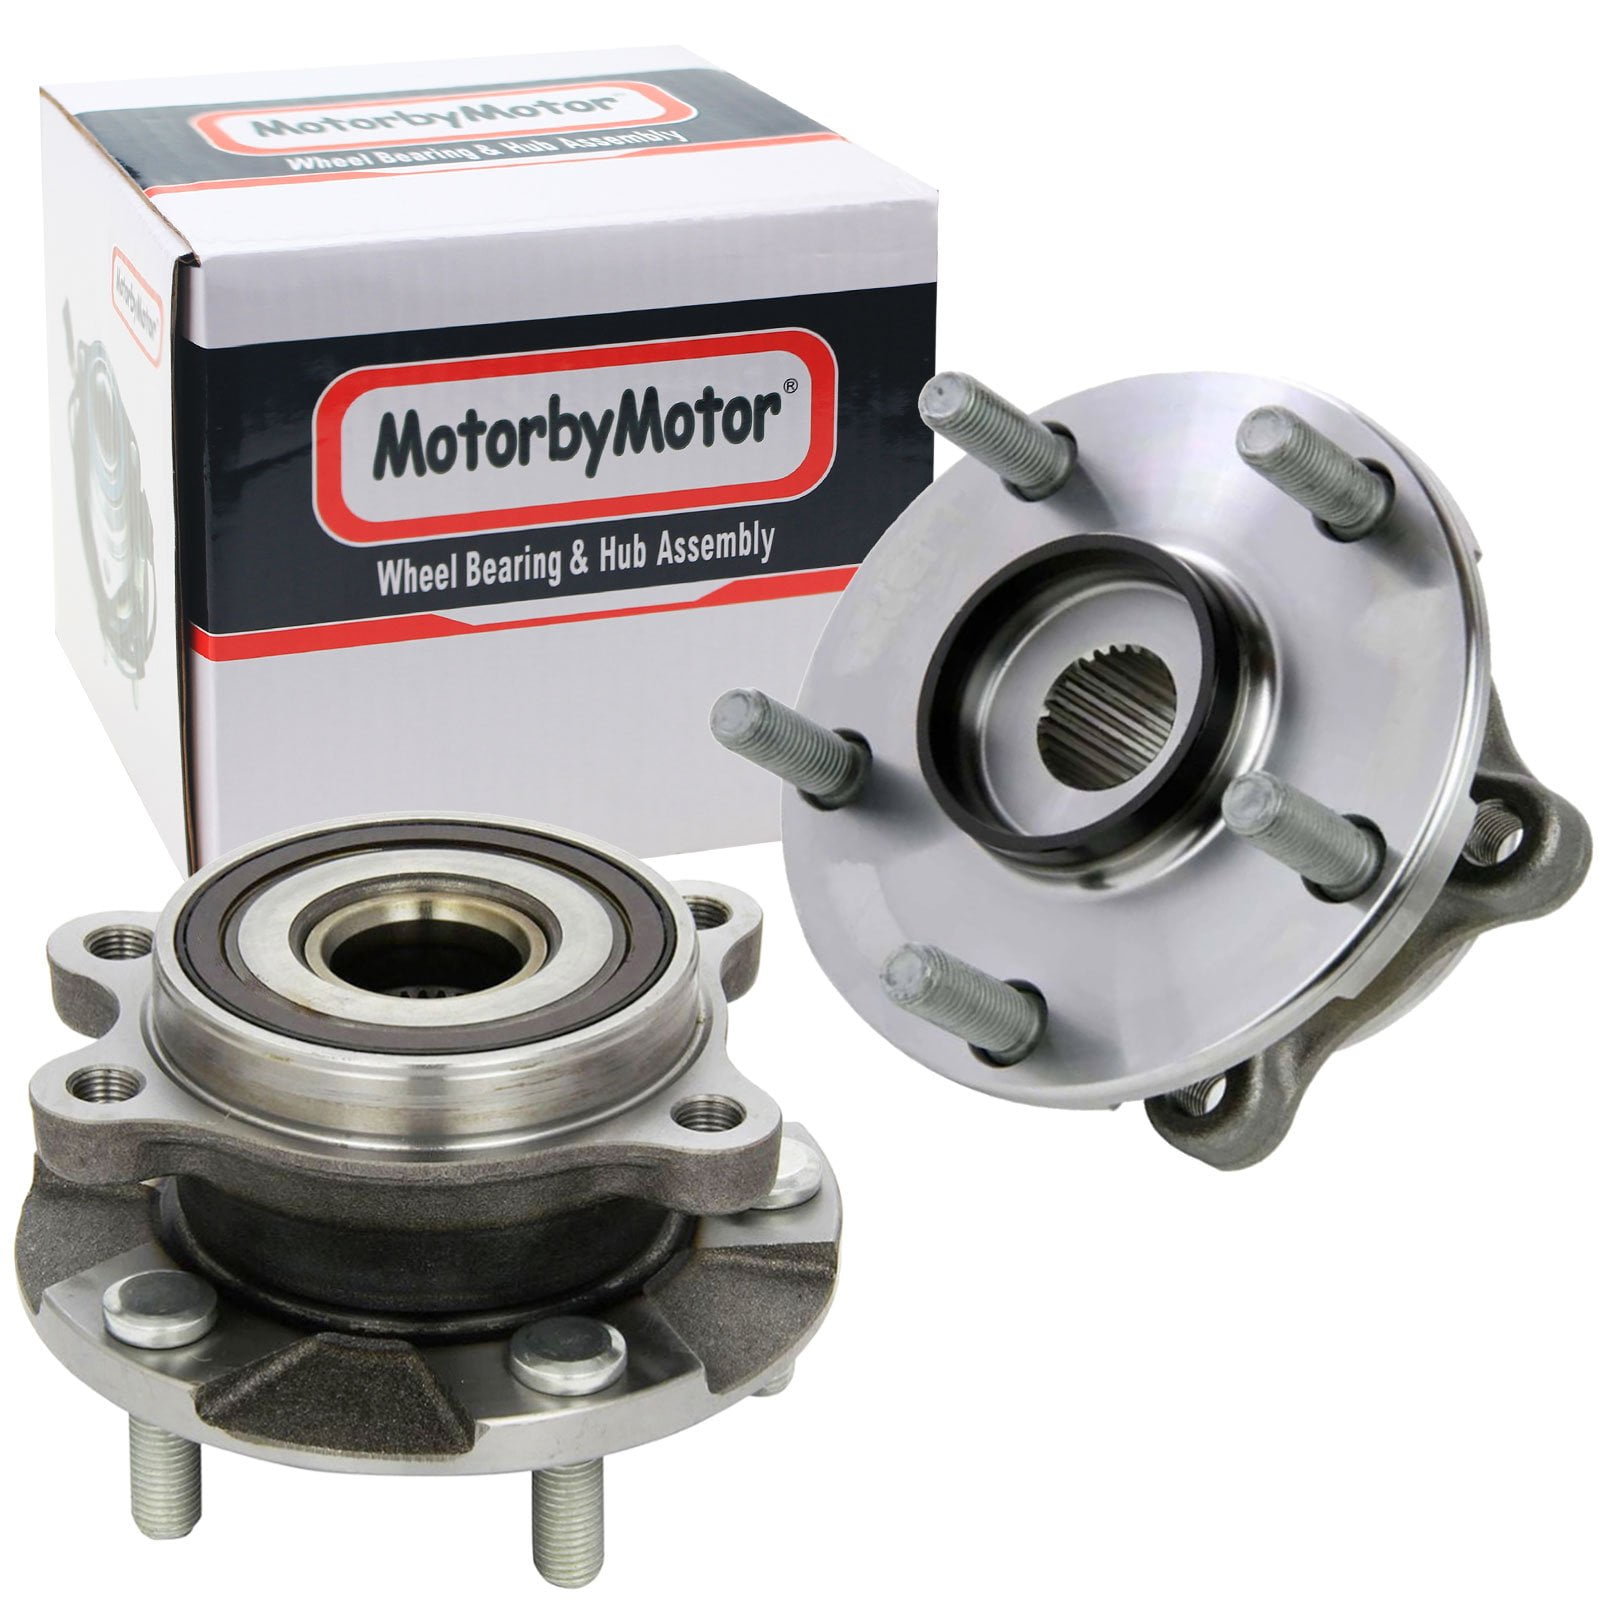 Detroit Axle Front Wheel Hub and Bearing Assembly Replacement for Toyota Rav4 Scion tC 513258 